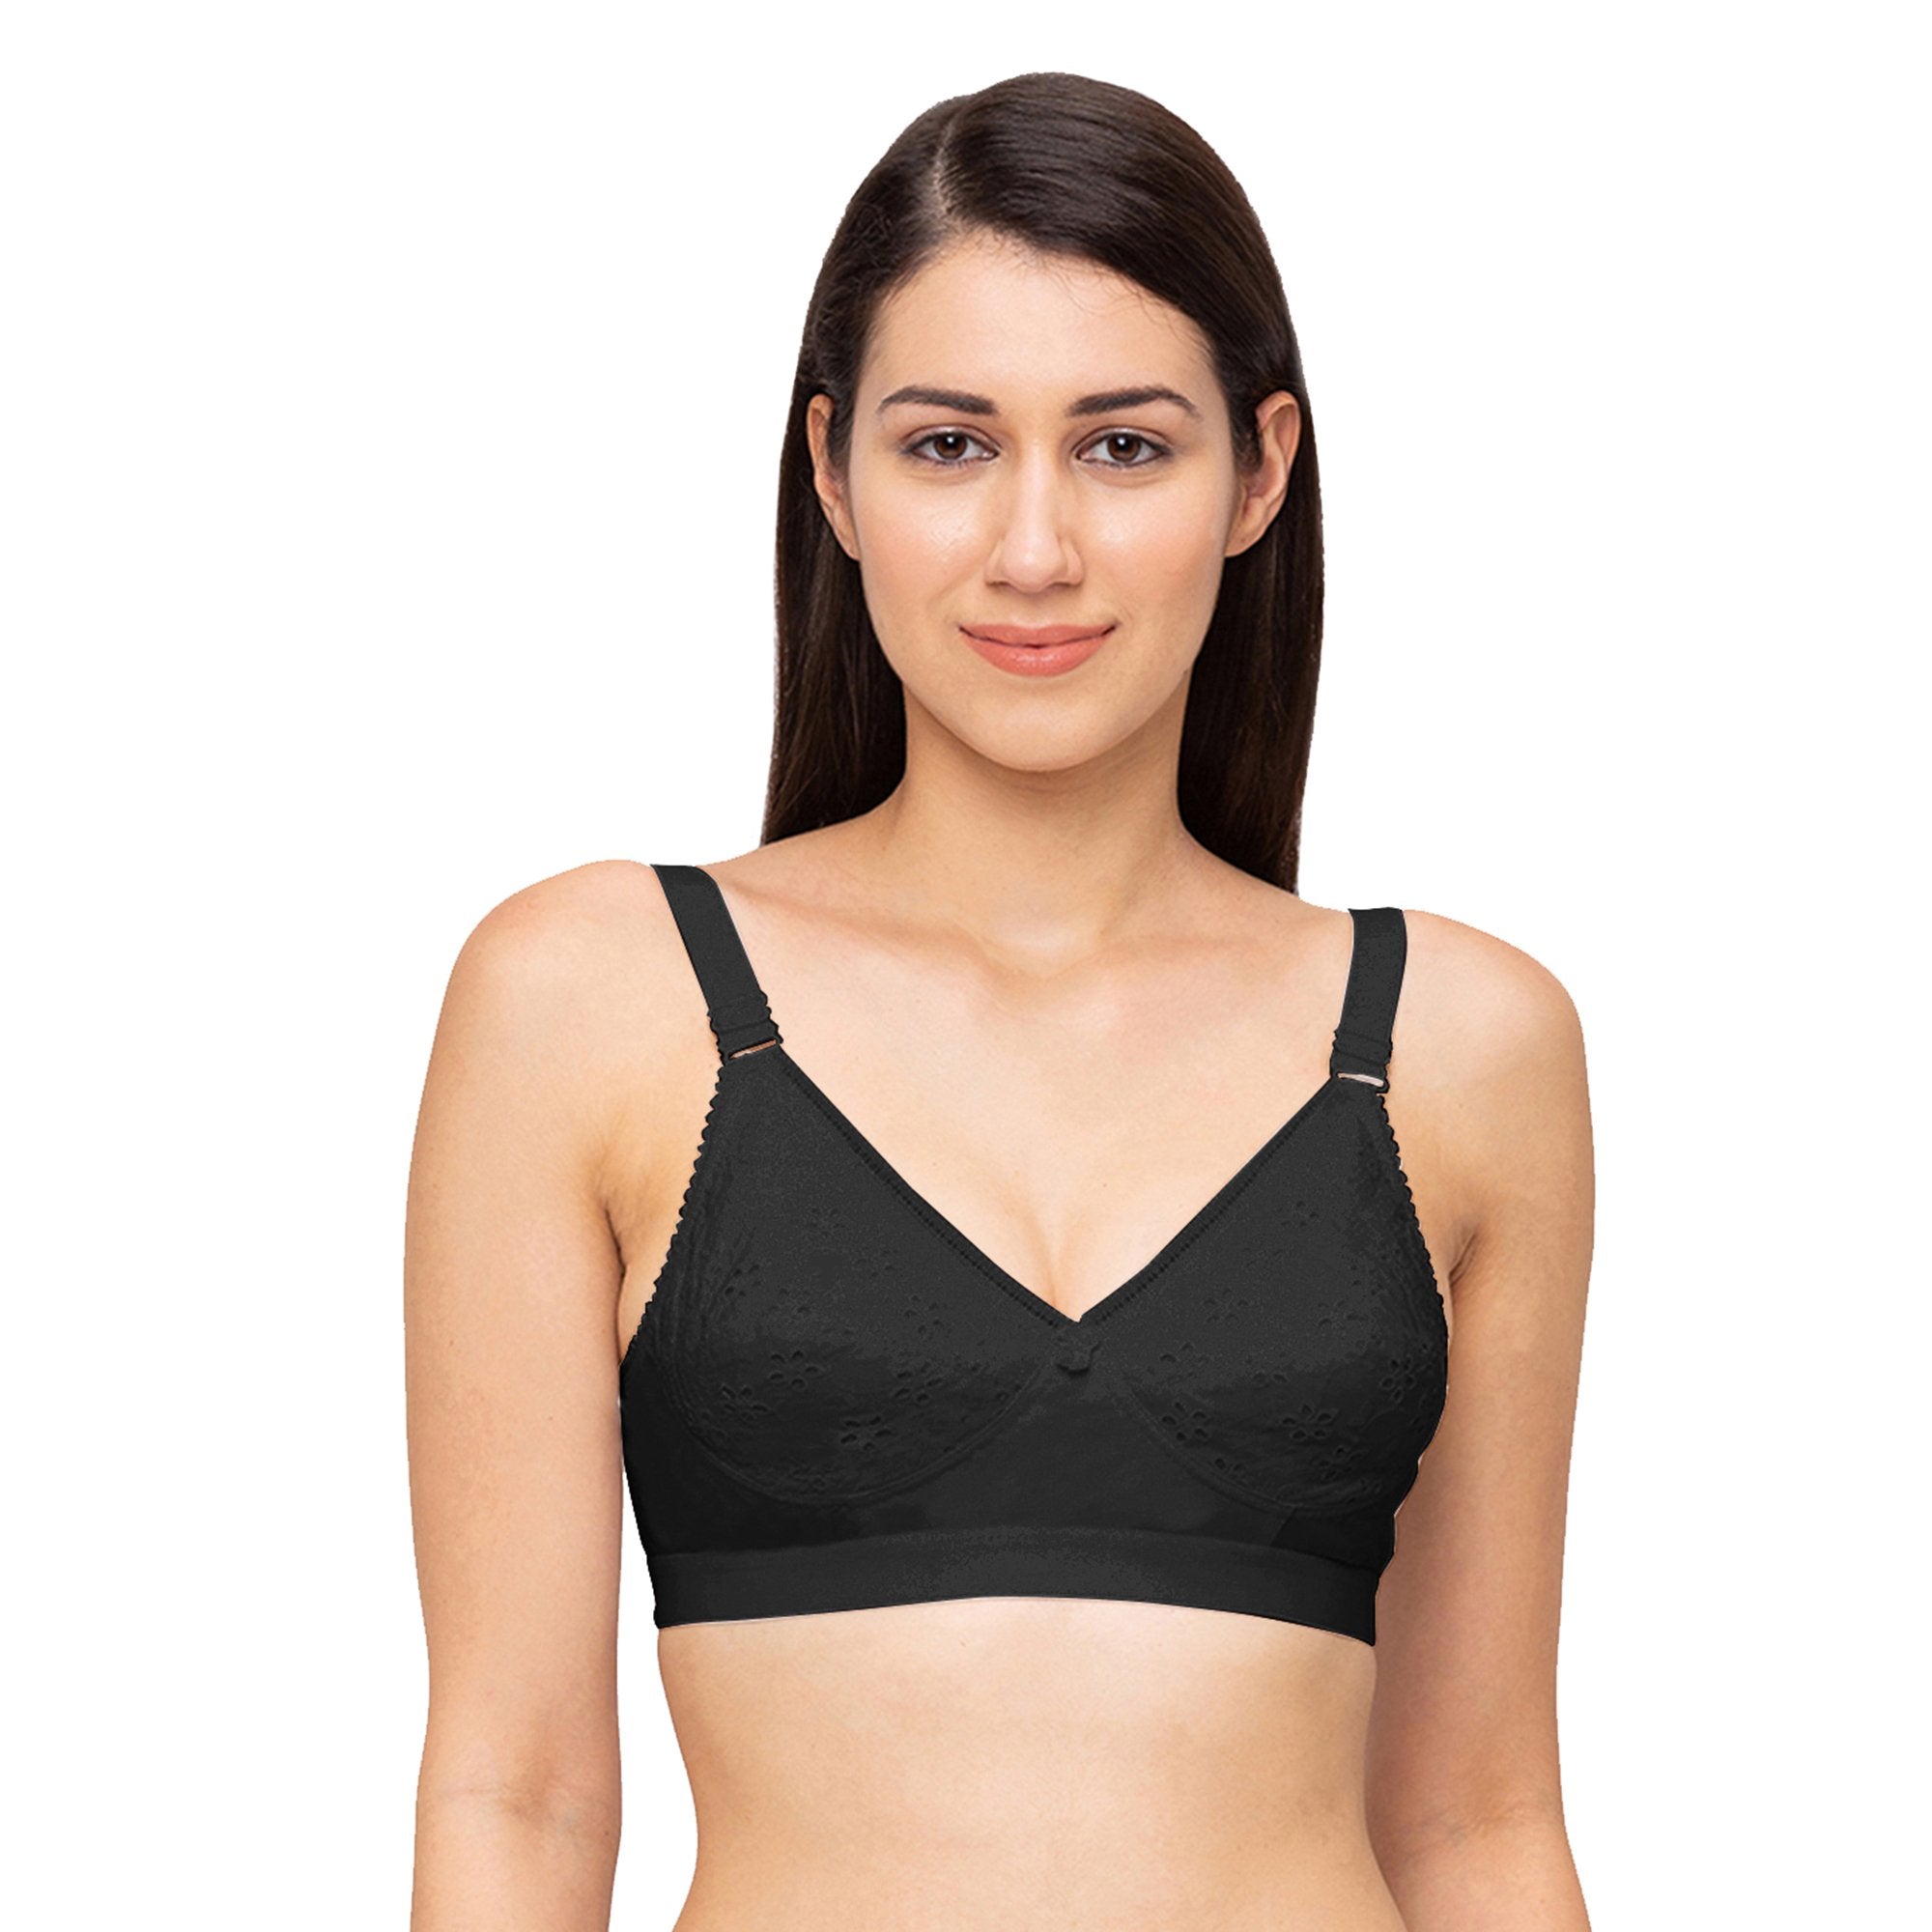 ENAMOR-BB03 TRENDY FIT STRETCH COTTON BEGINNERS BRA WITH ANTIMICROBIAL